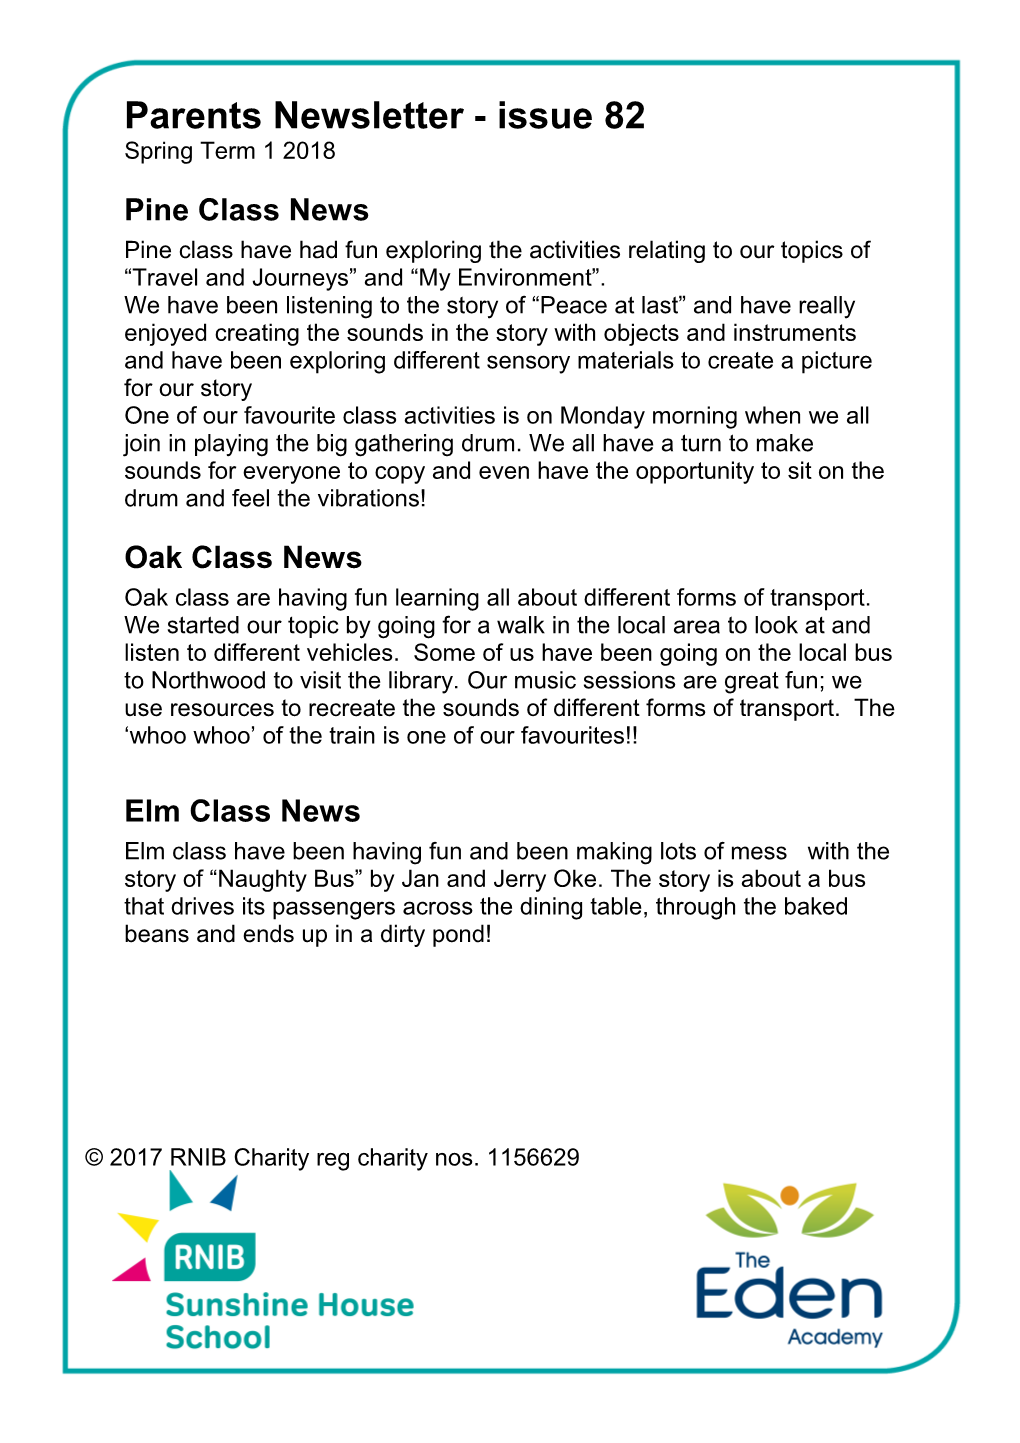 Parents Newsletter - Issue 82